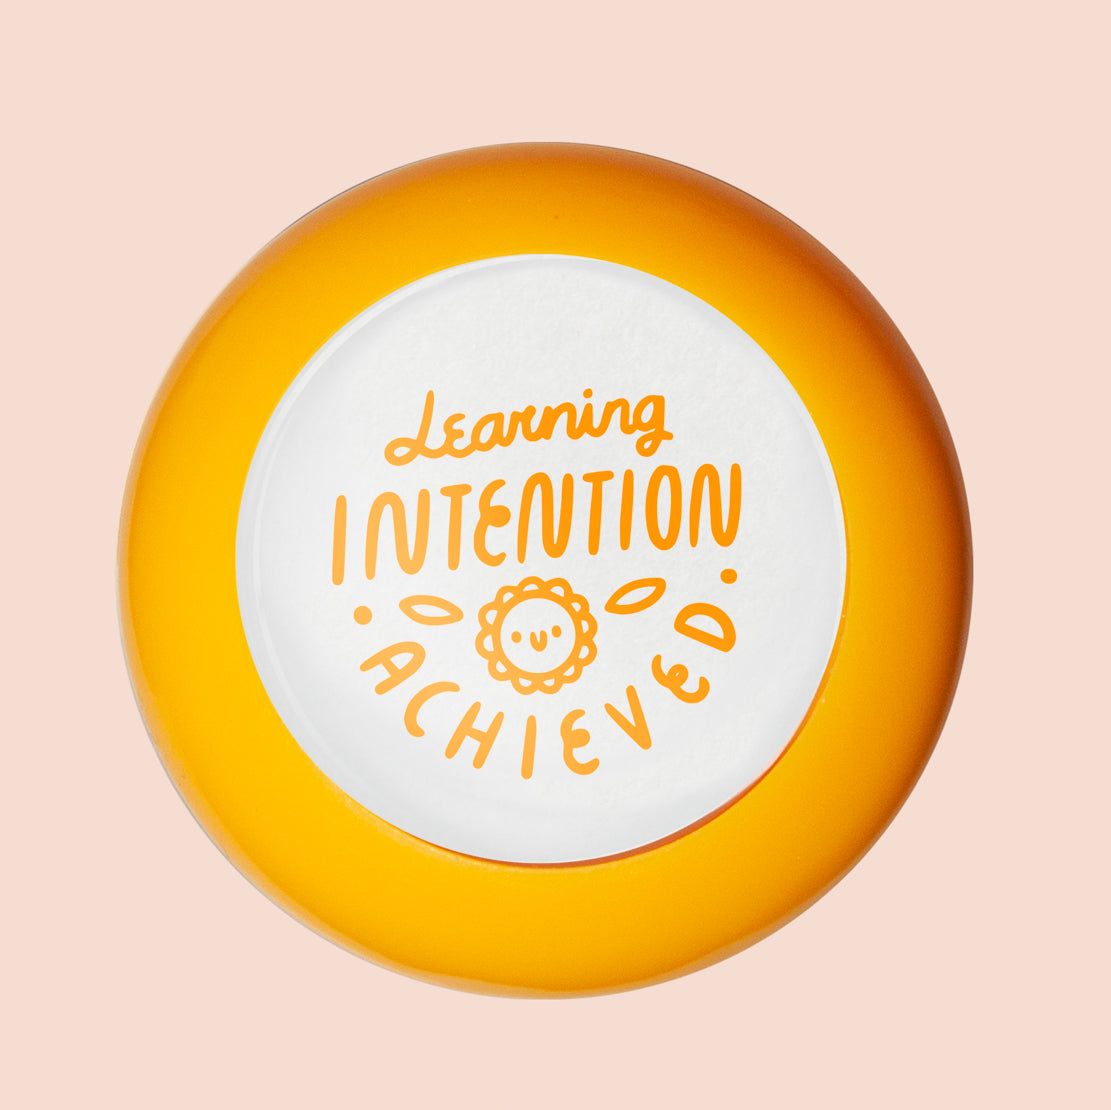 Learning Intention Achieved Stamp